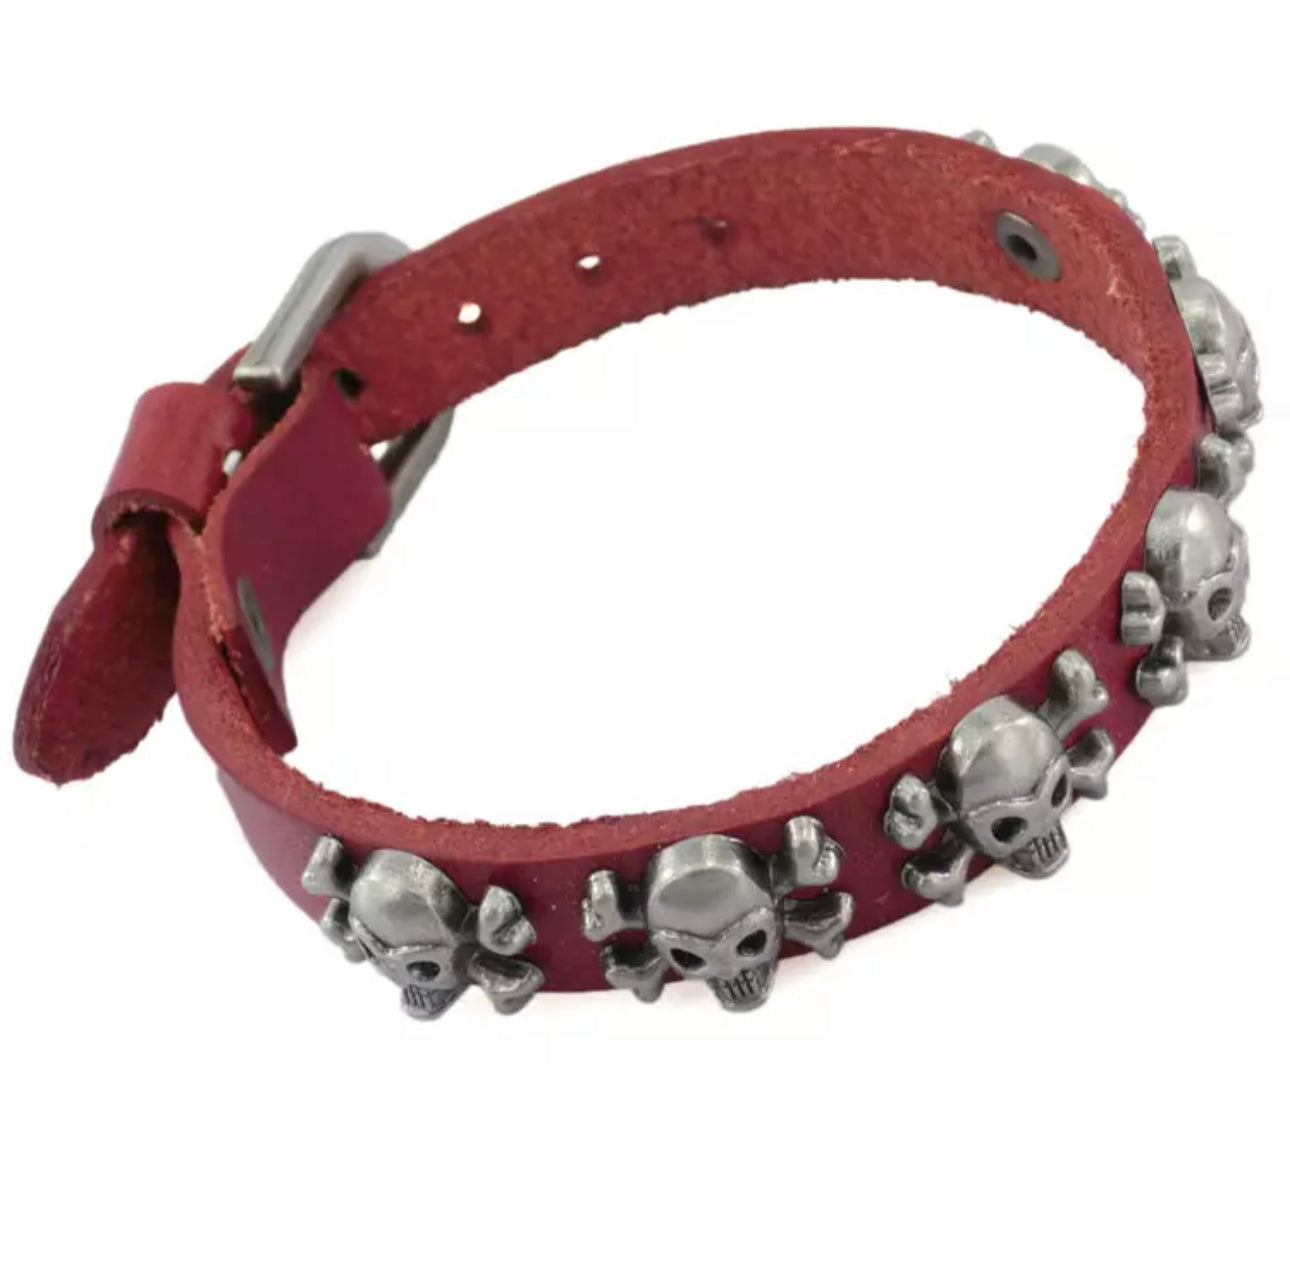 Red Leather Pirate Bracelet